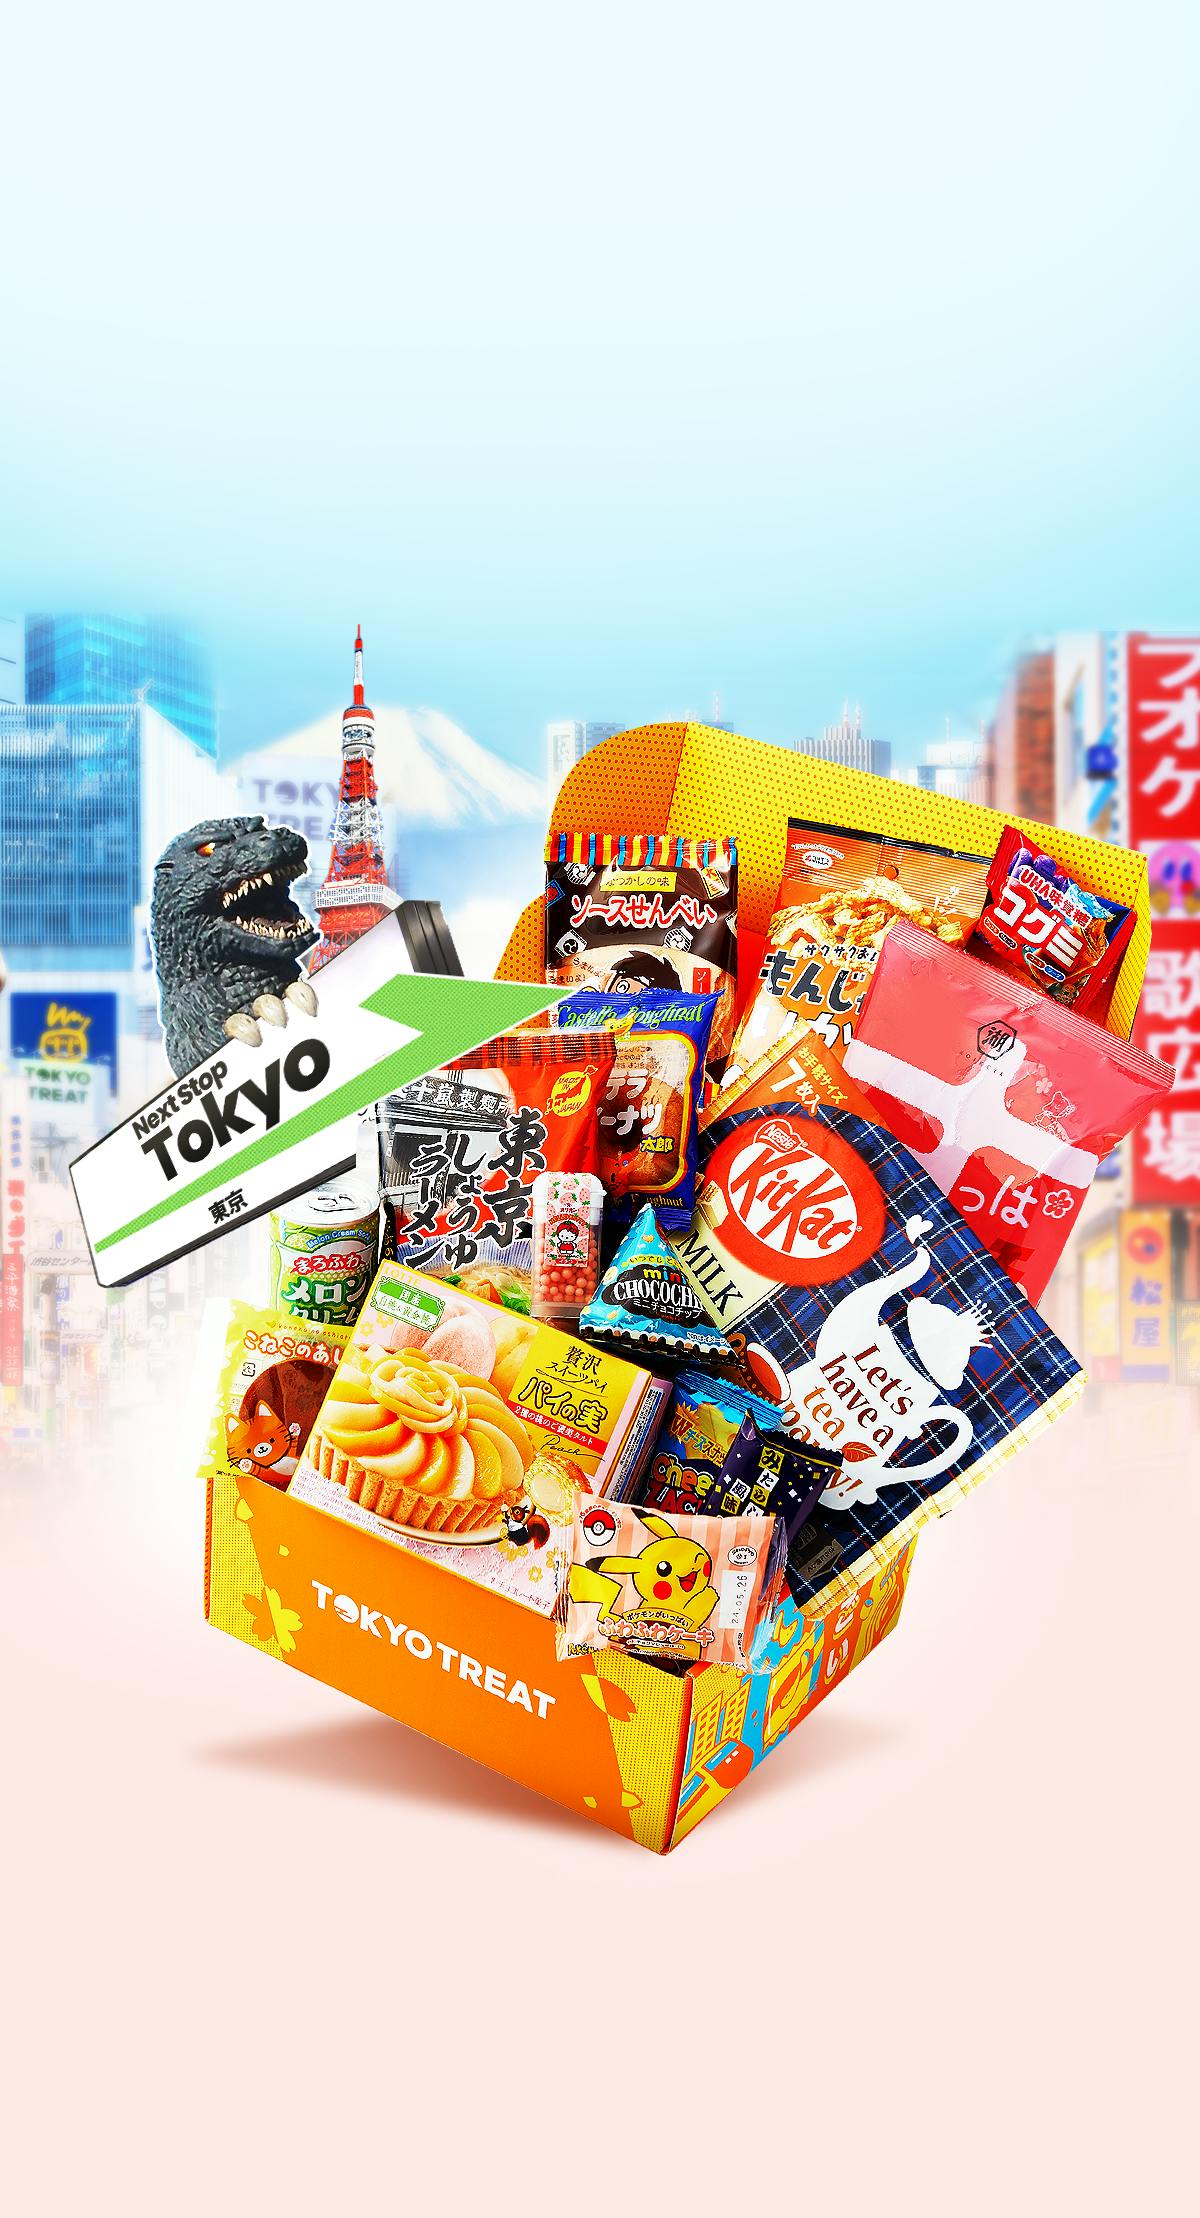 The TokyoTreat box sits against a backdrop of Tokyo, surrounded by well-known Tokyo key locations.